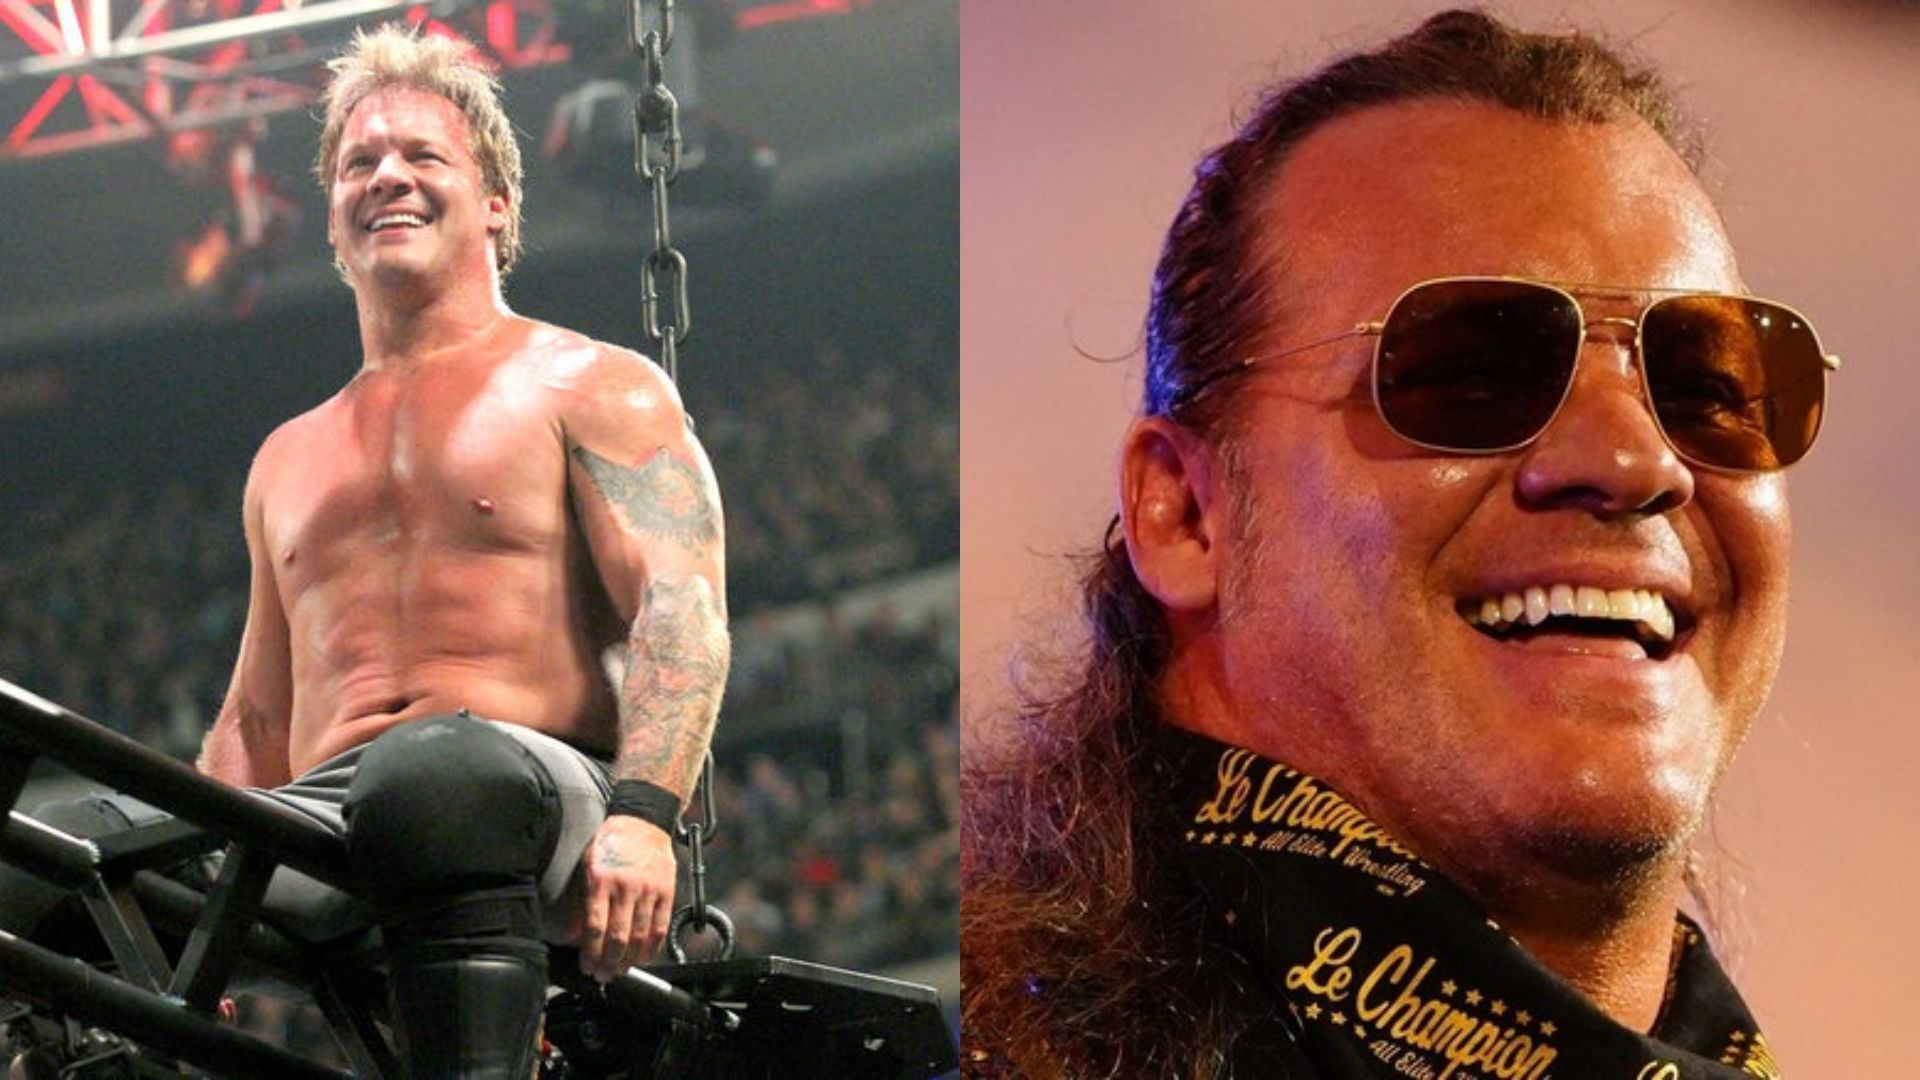 WWE legend and current AEW star, Chris Jericho!